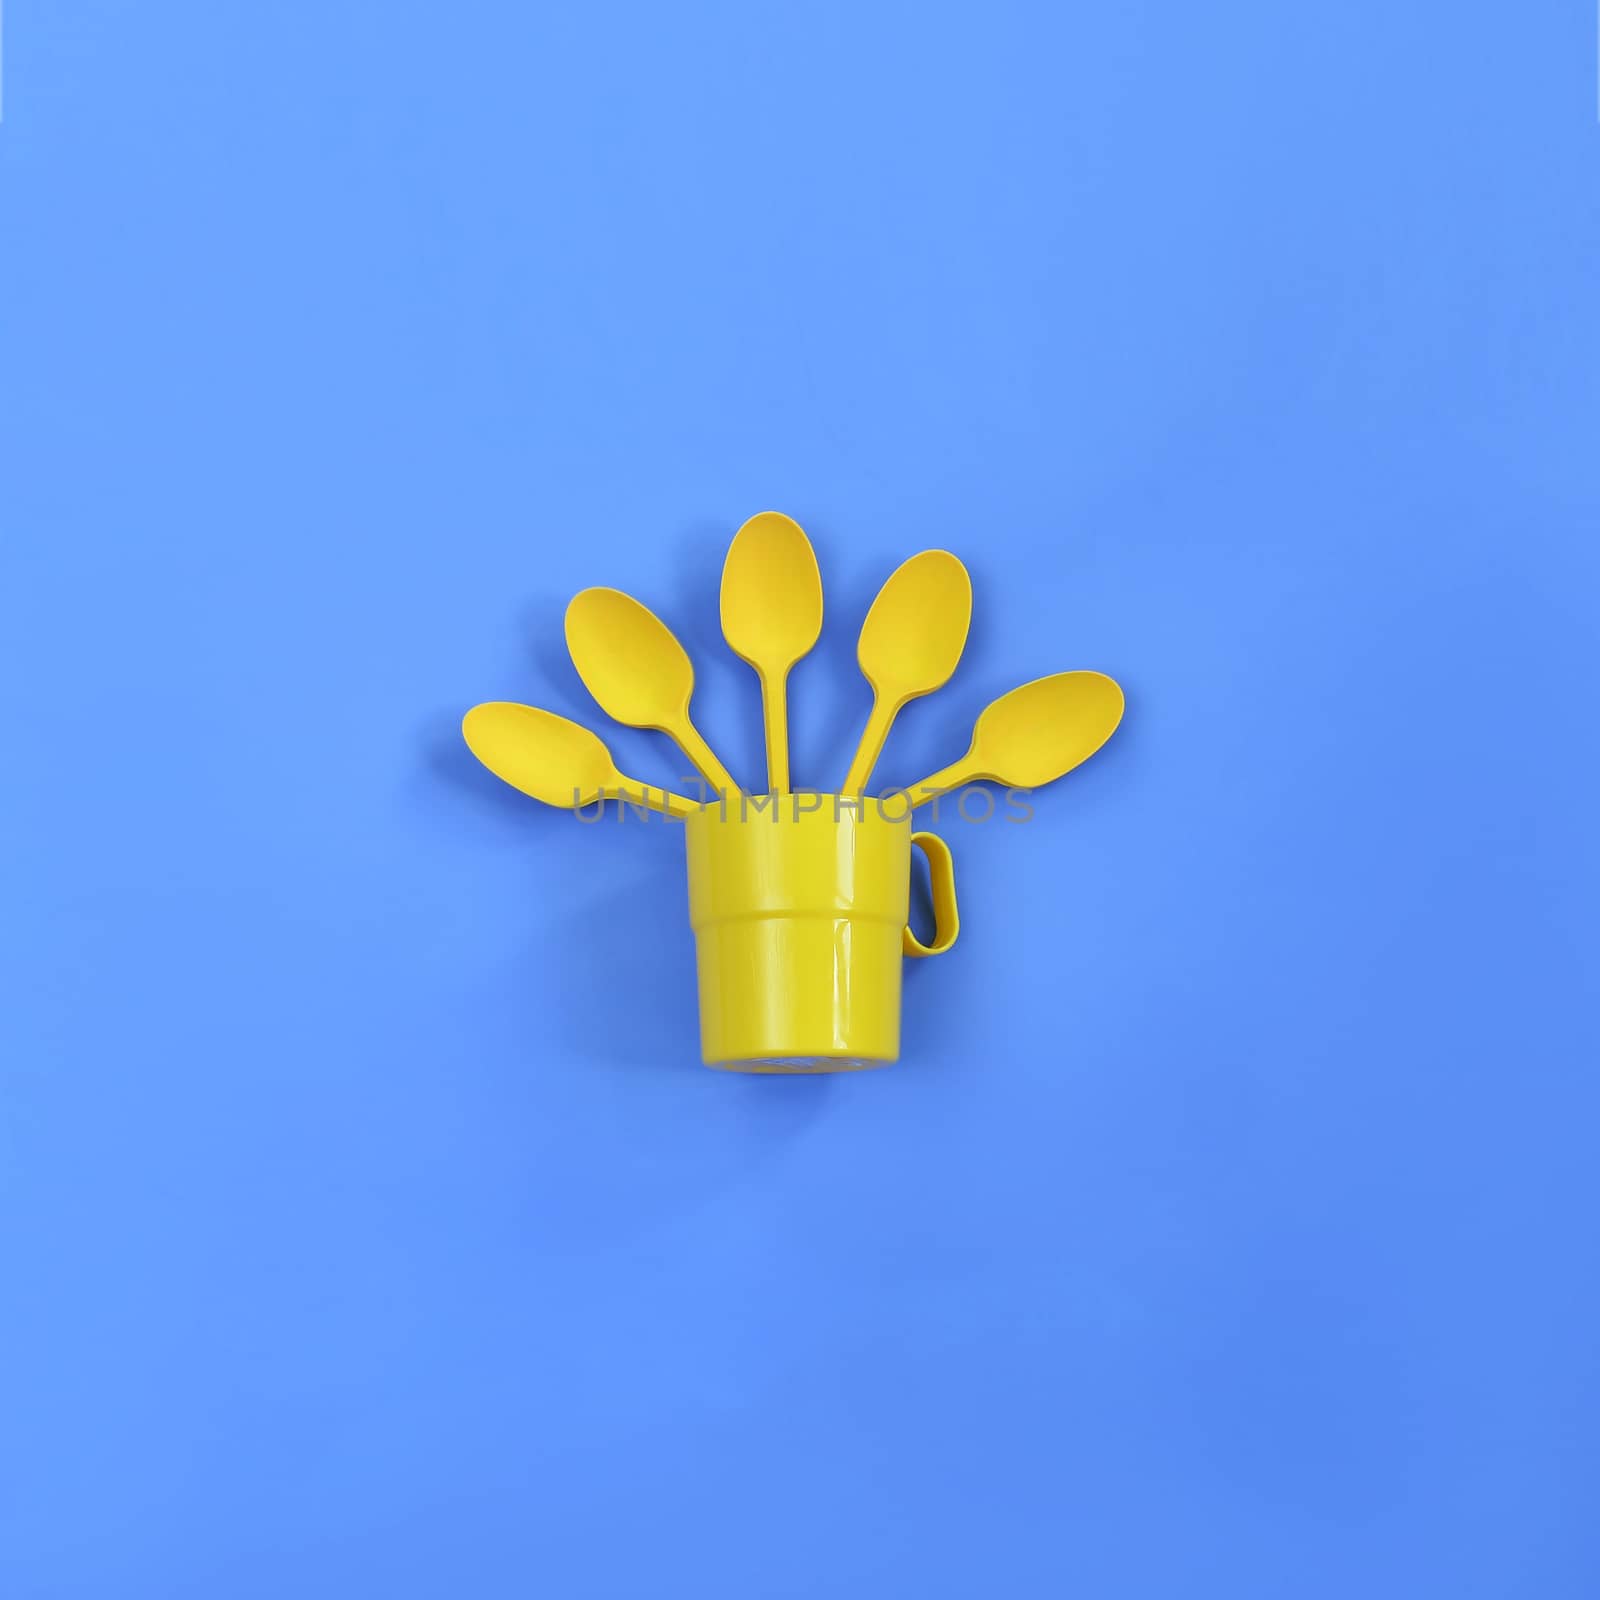 A yellow plastic mug and spoons lay in it on a bright blue background. The concept of a holiday, a picnic